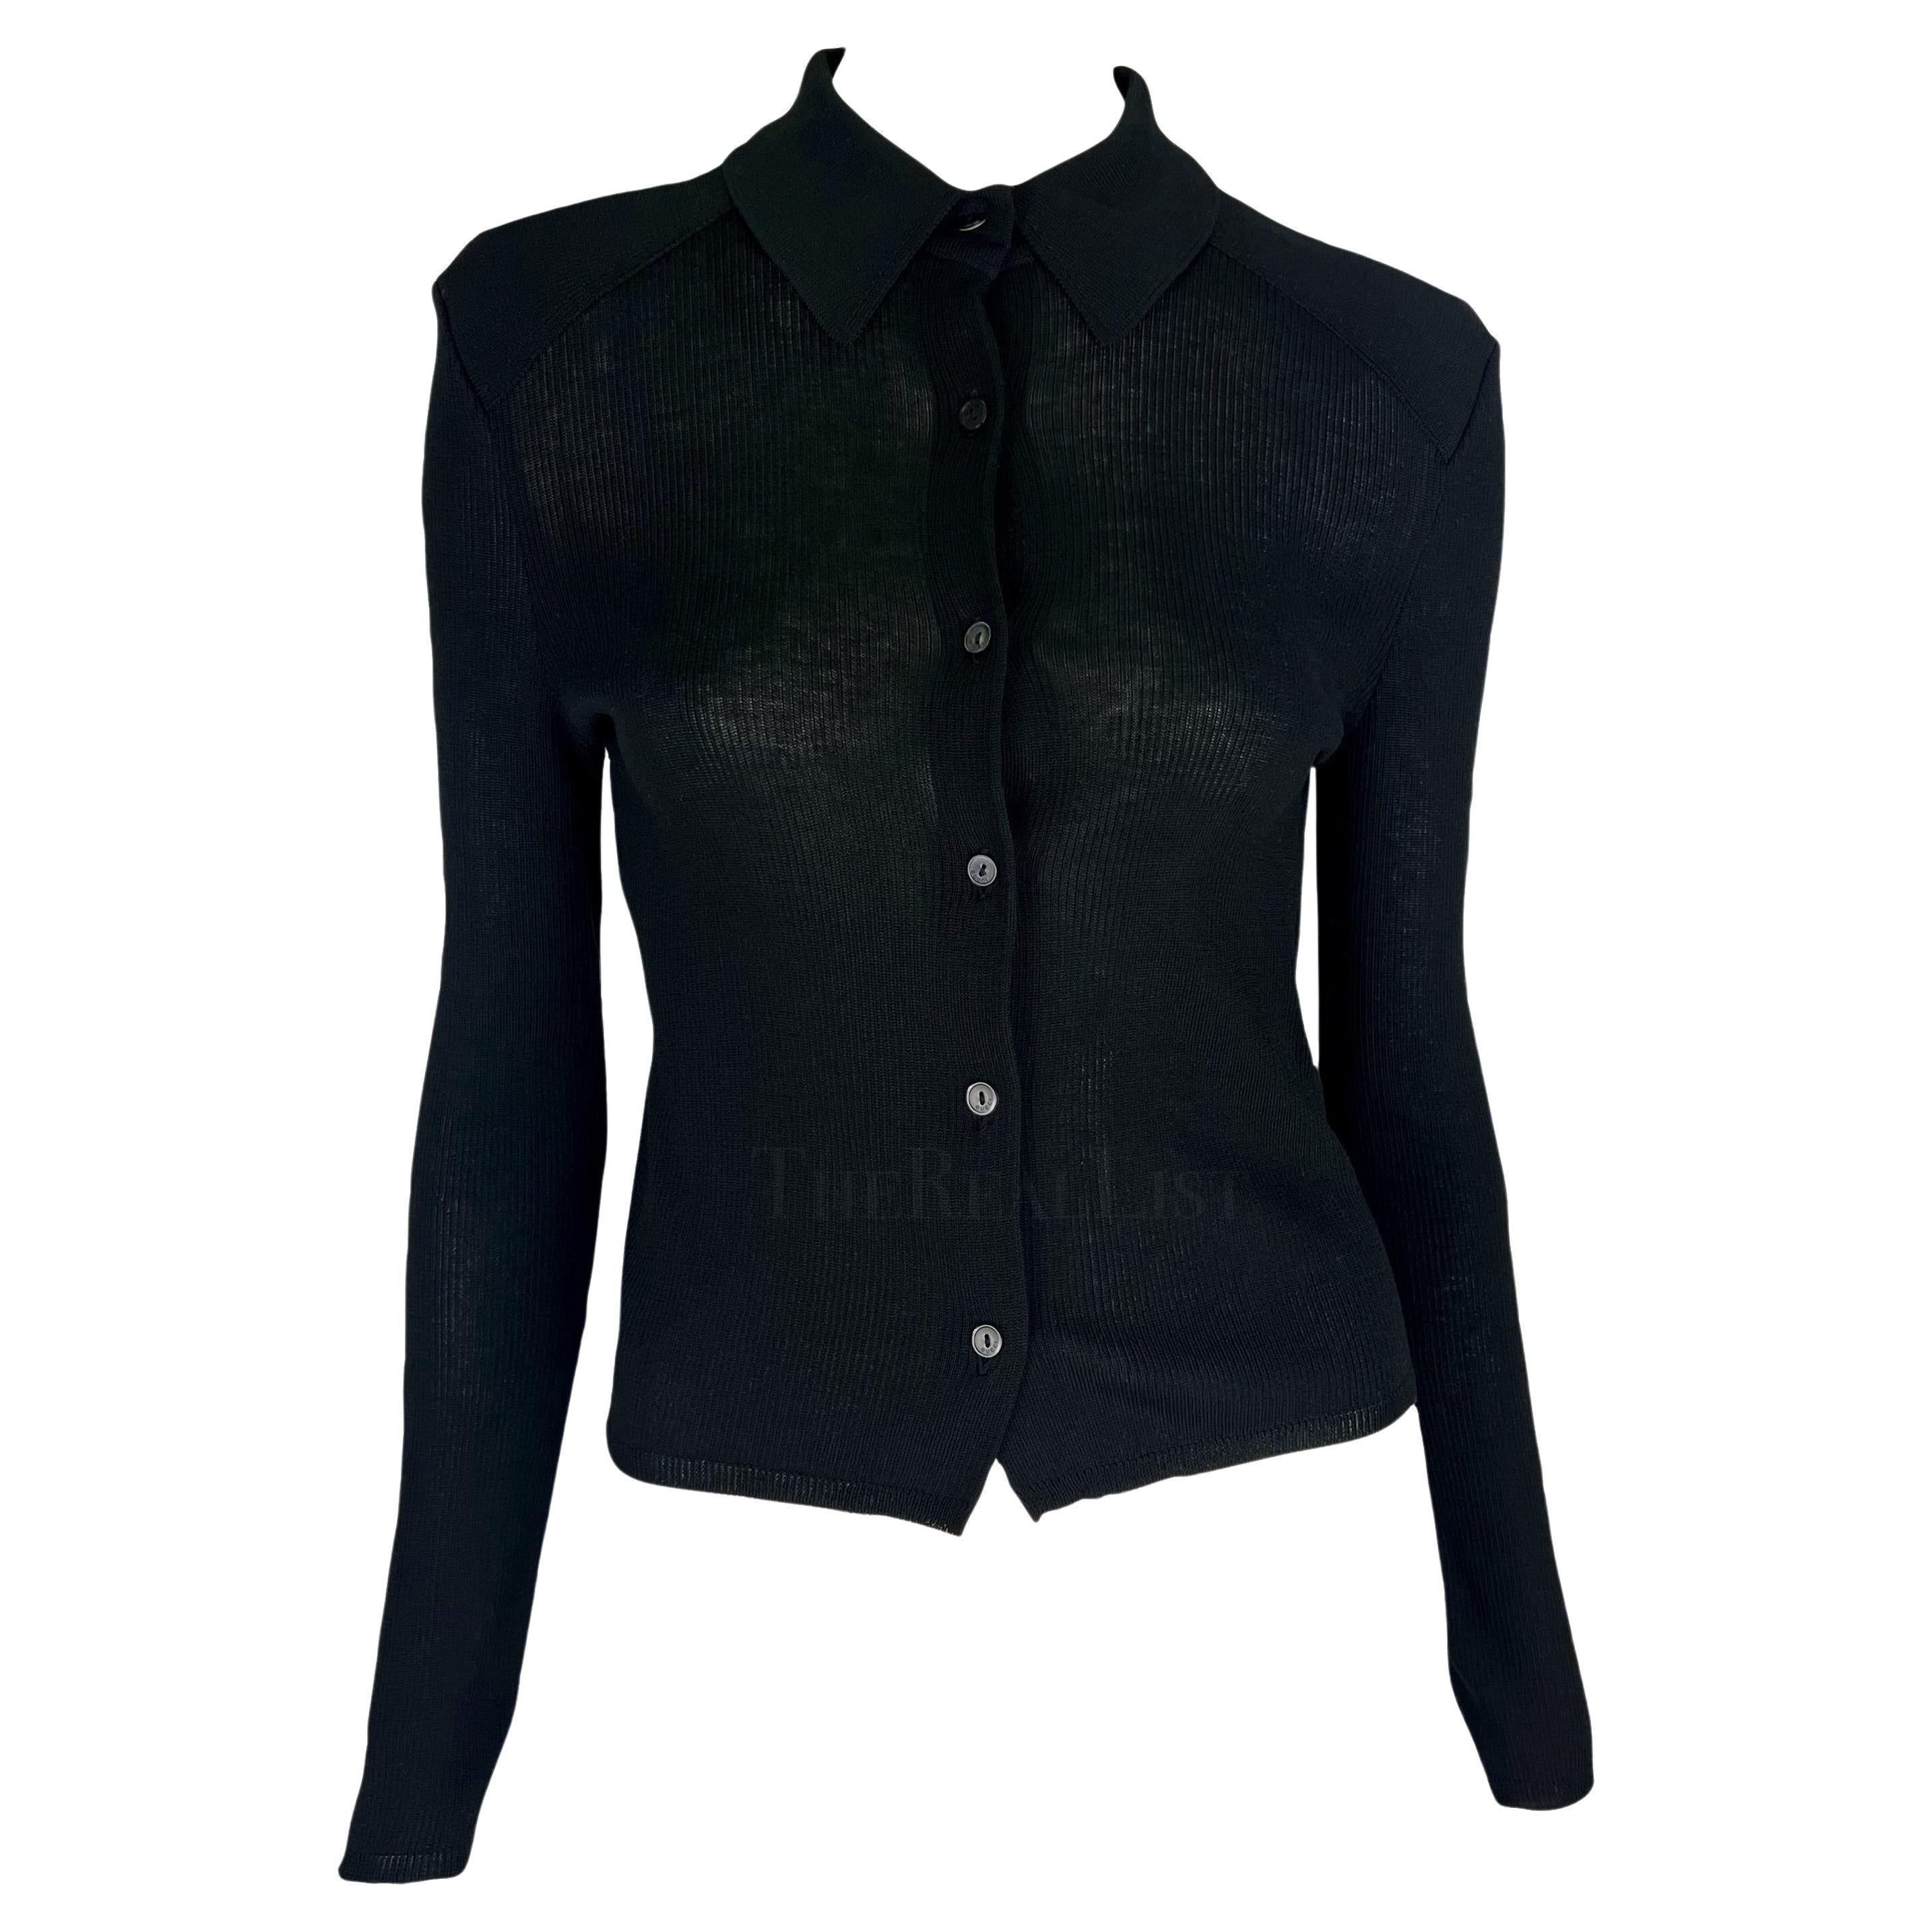 1998 Gucci by Tom Ford Semi-Sheer Ribbed Stretch Sheer Knit Black Button-Up Top For Sale